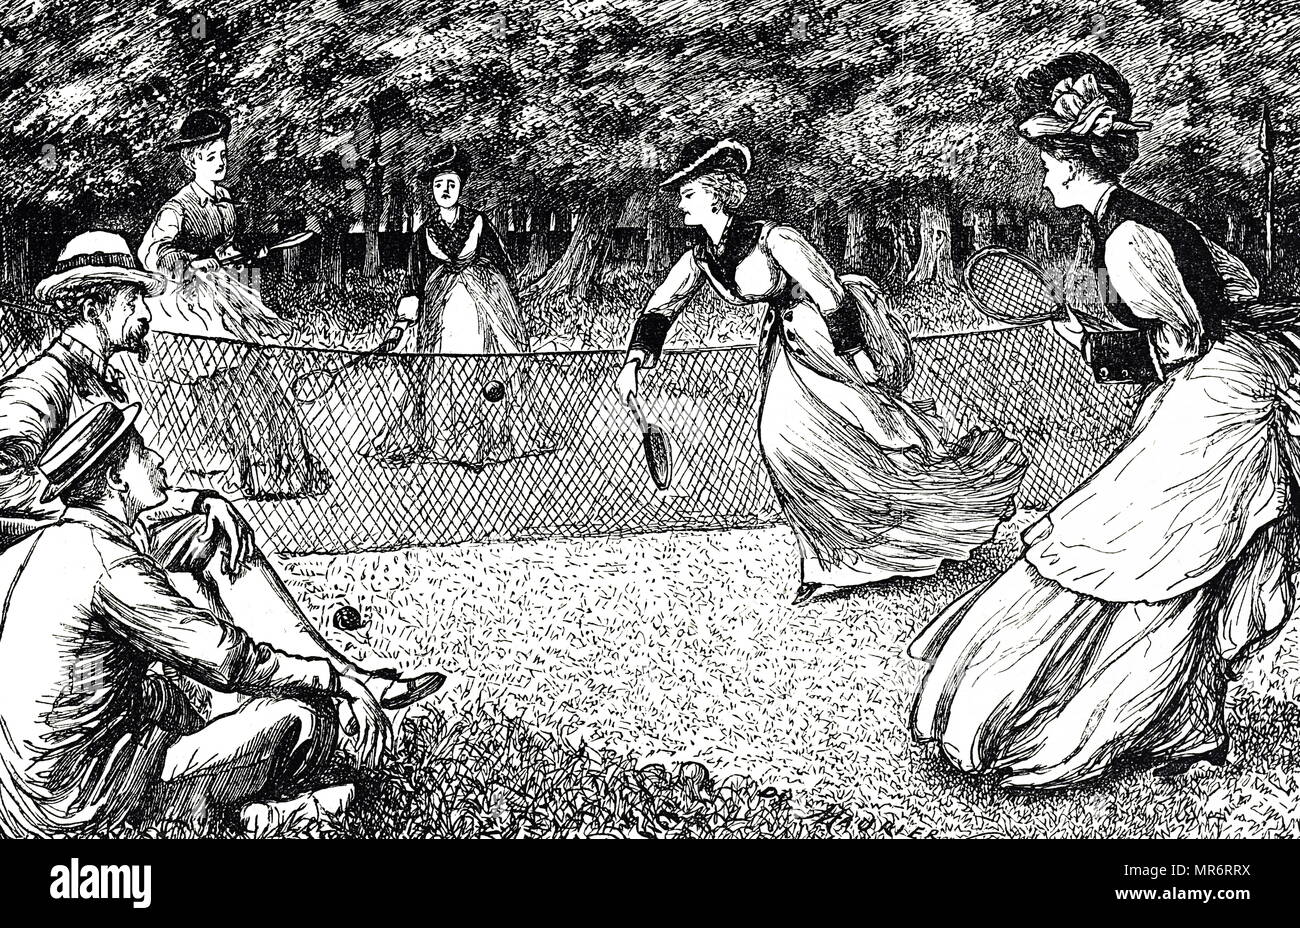 Cartoon depicting a game of lawn tennis. Illustrated by George du Maurier  (1834-1896) a Franco-British cartoonist and author. Dated 19th century  Stock Photo - Alamy